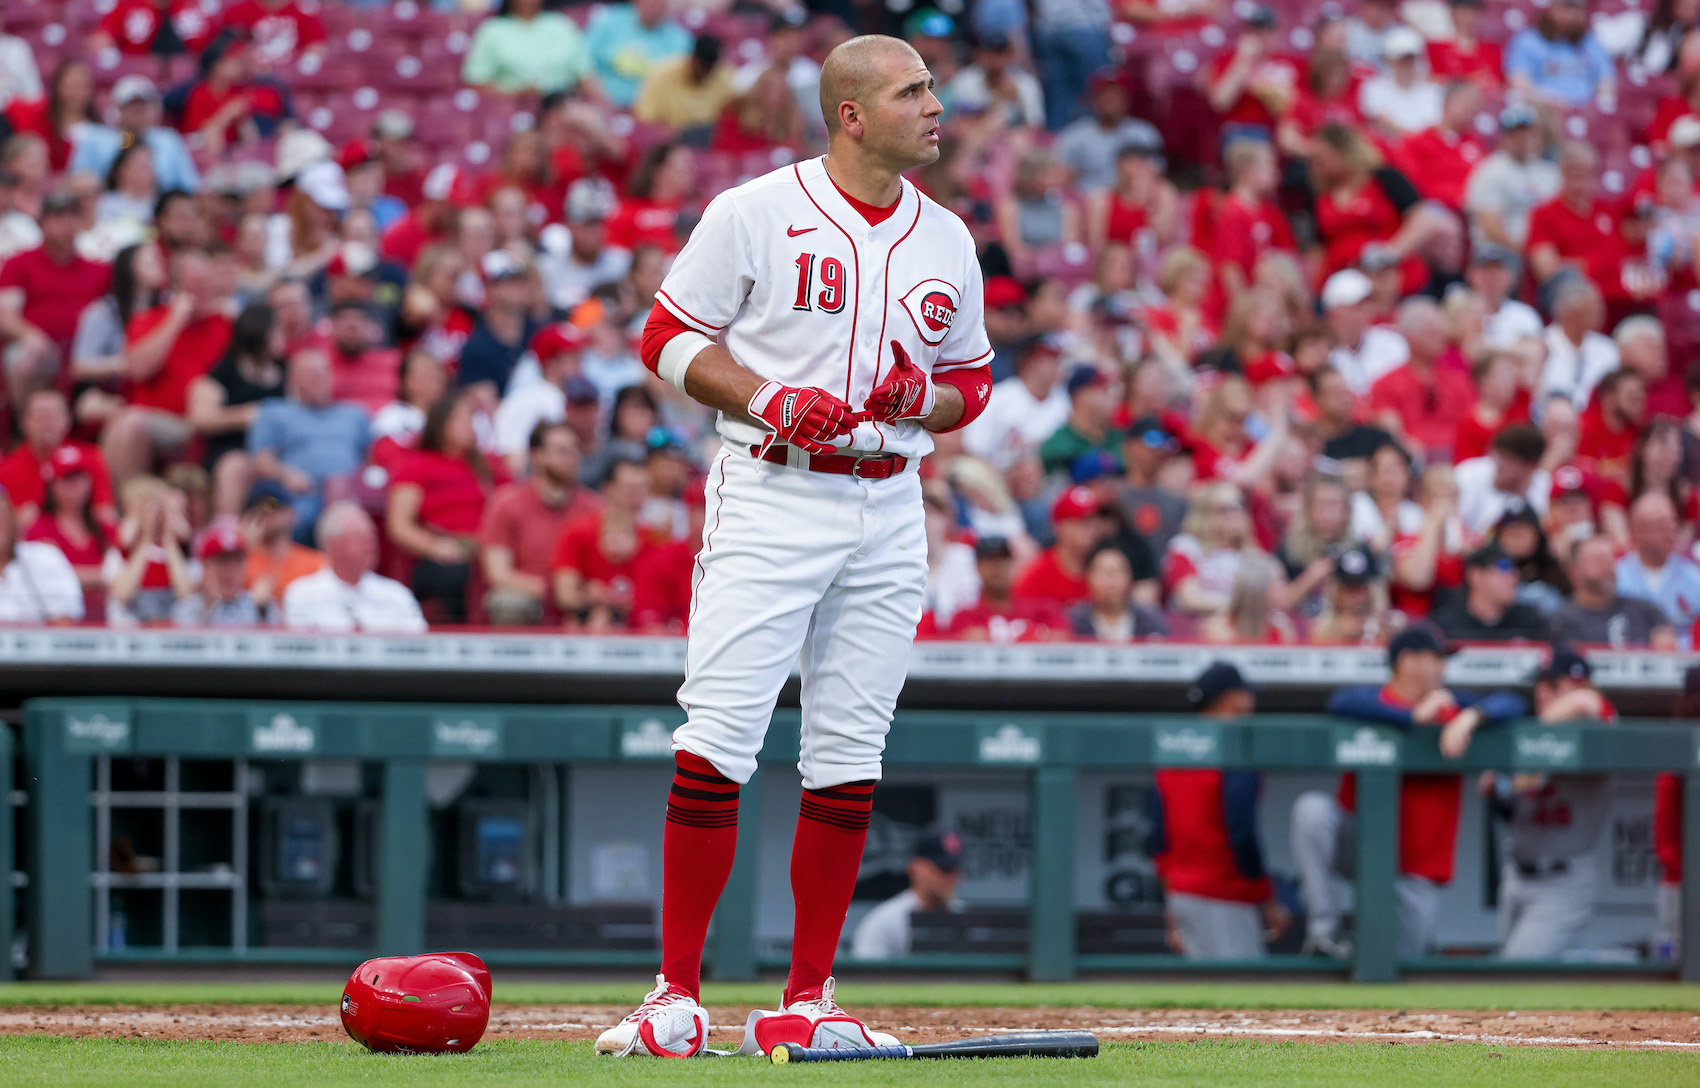 Joey Votto strikes out in a game against the Cardinals.